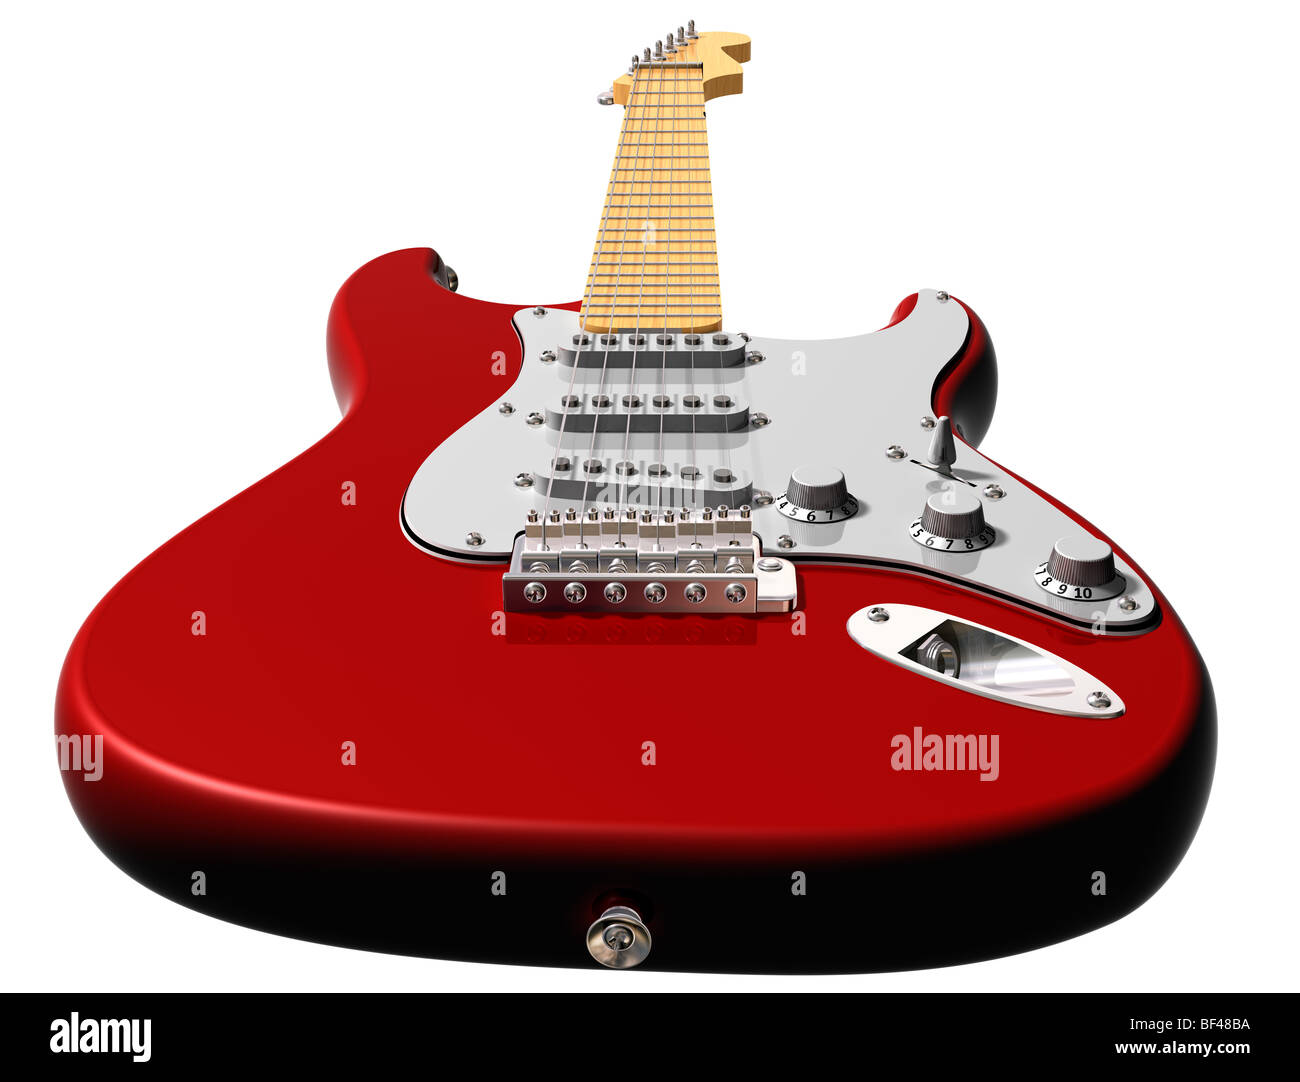 Isolated illustration of a red electric guitar Stock Photo